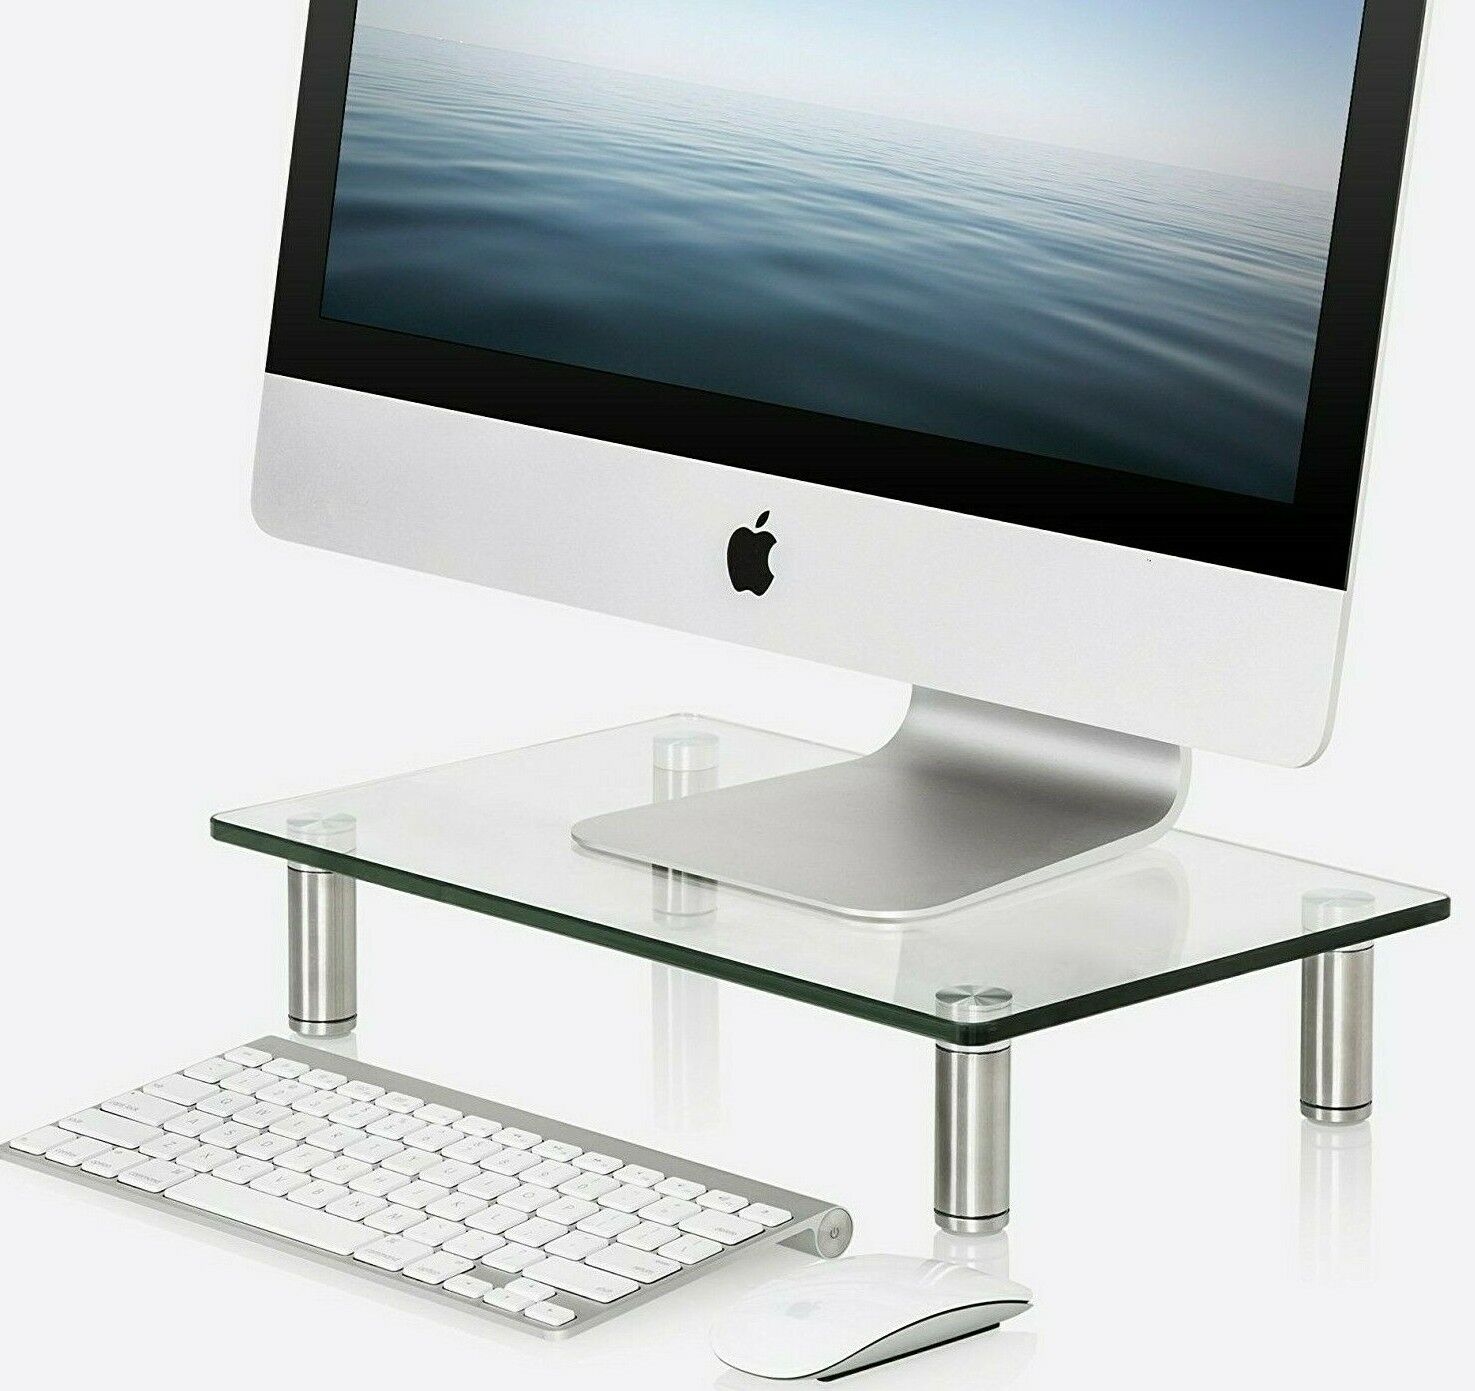 FITUEYES Clear Glass Monitor Riser Desktop Stand ✪NEW✪ DT103801GC iMac XBOX PS4